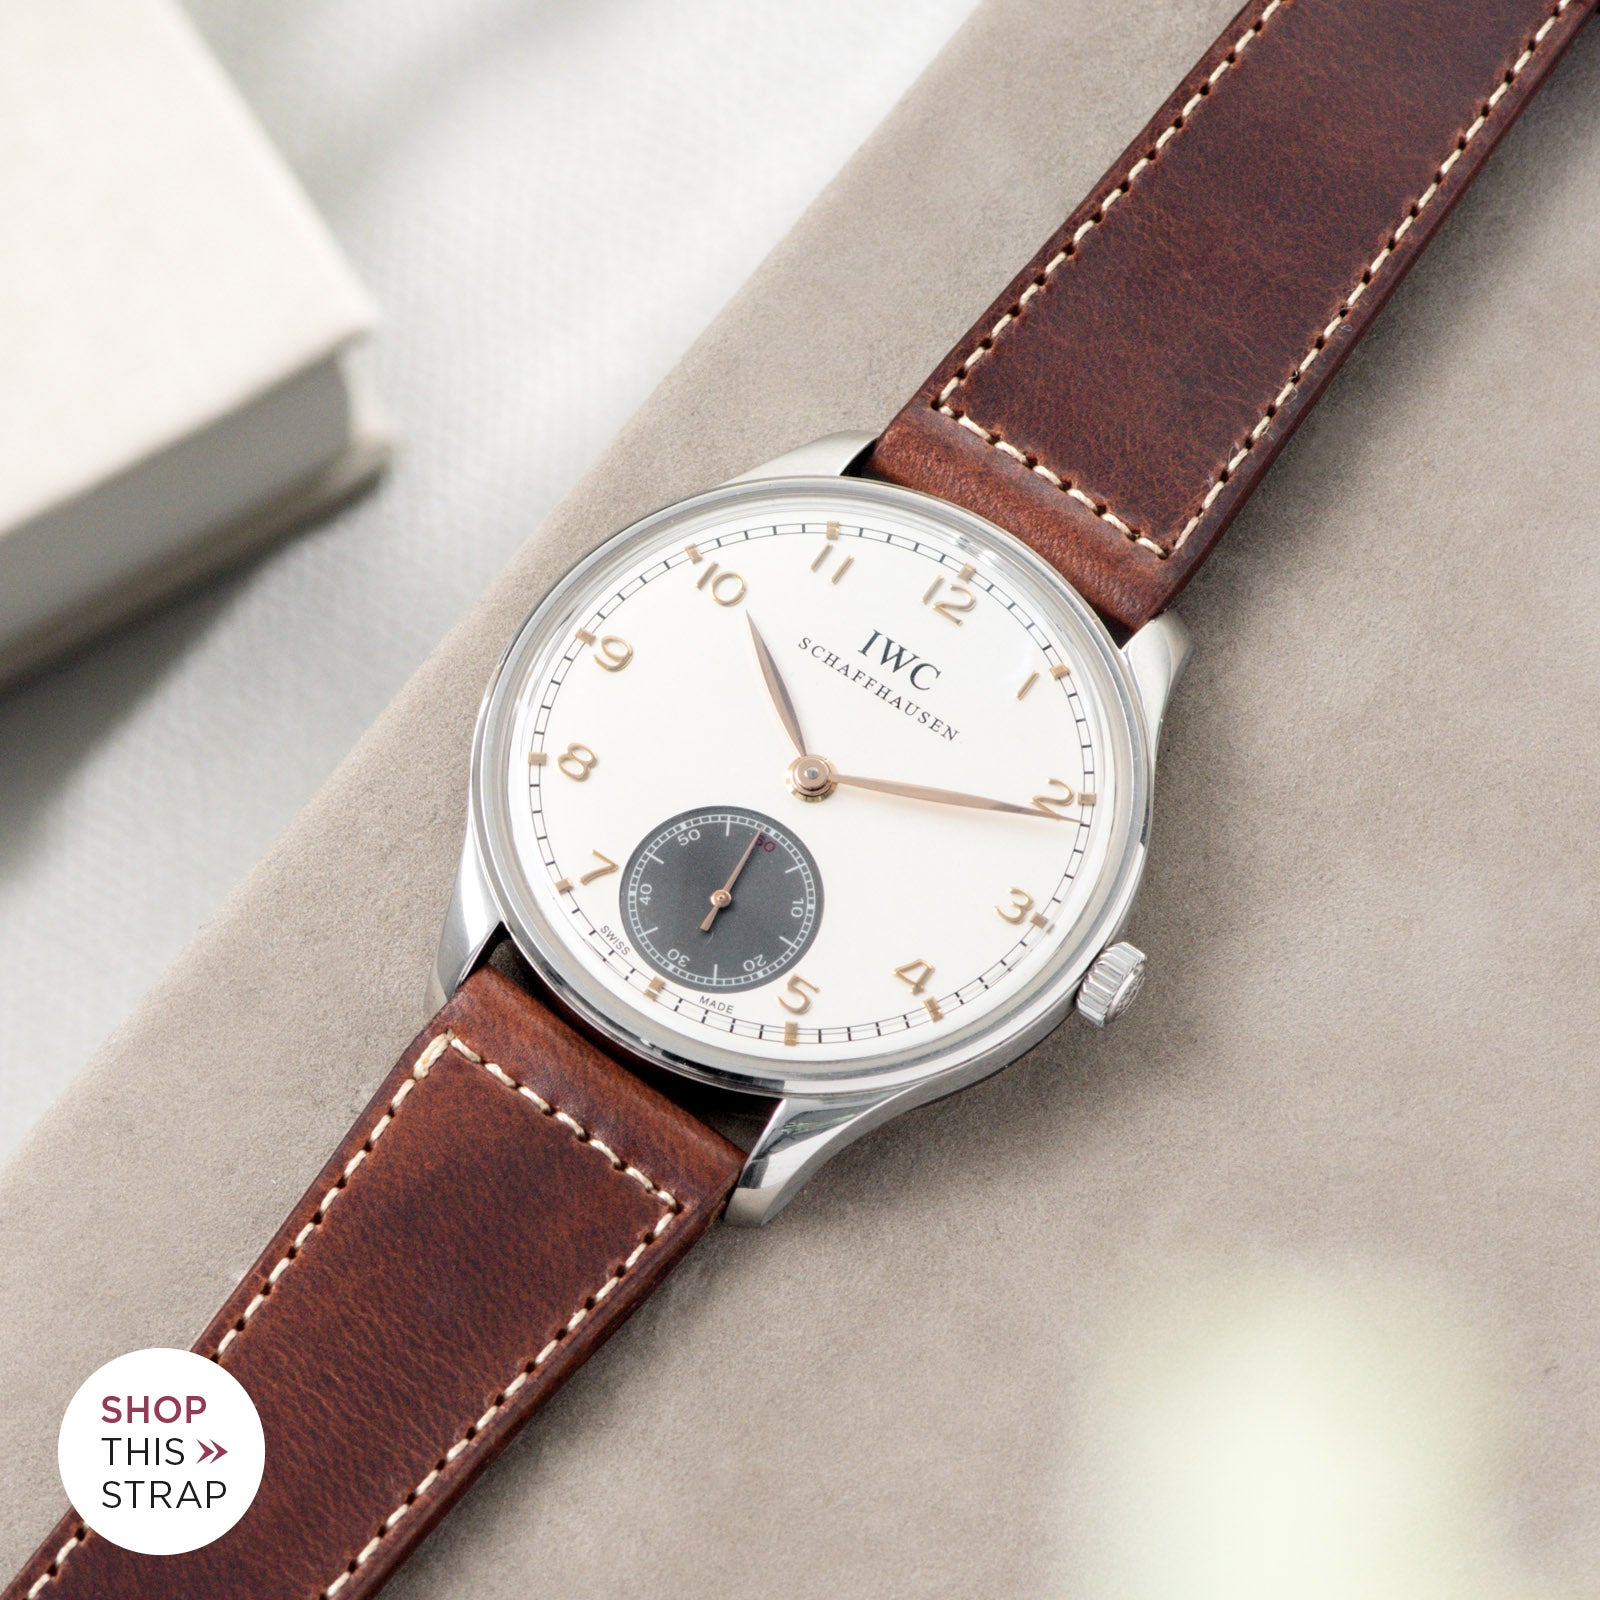 Bulang and Sons_Strap Guide_IWC Portuguese Ref IW545405_Siena Brown Boxed Stitch Leather Watch Strap